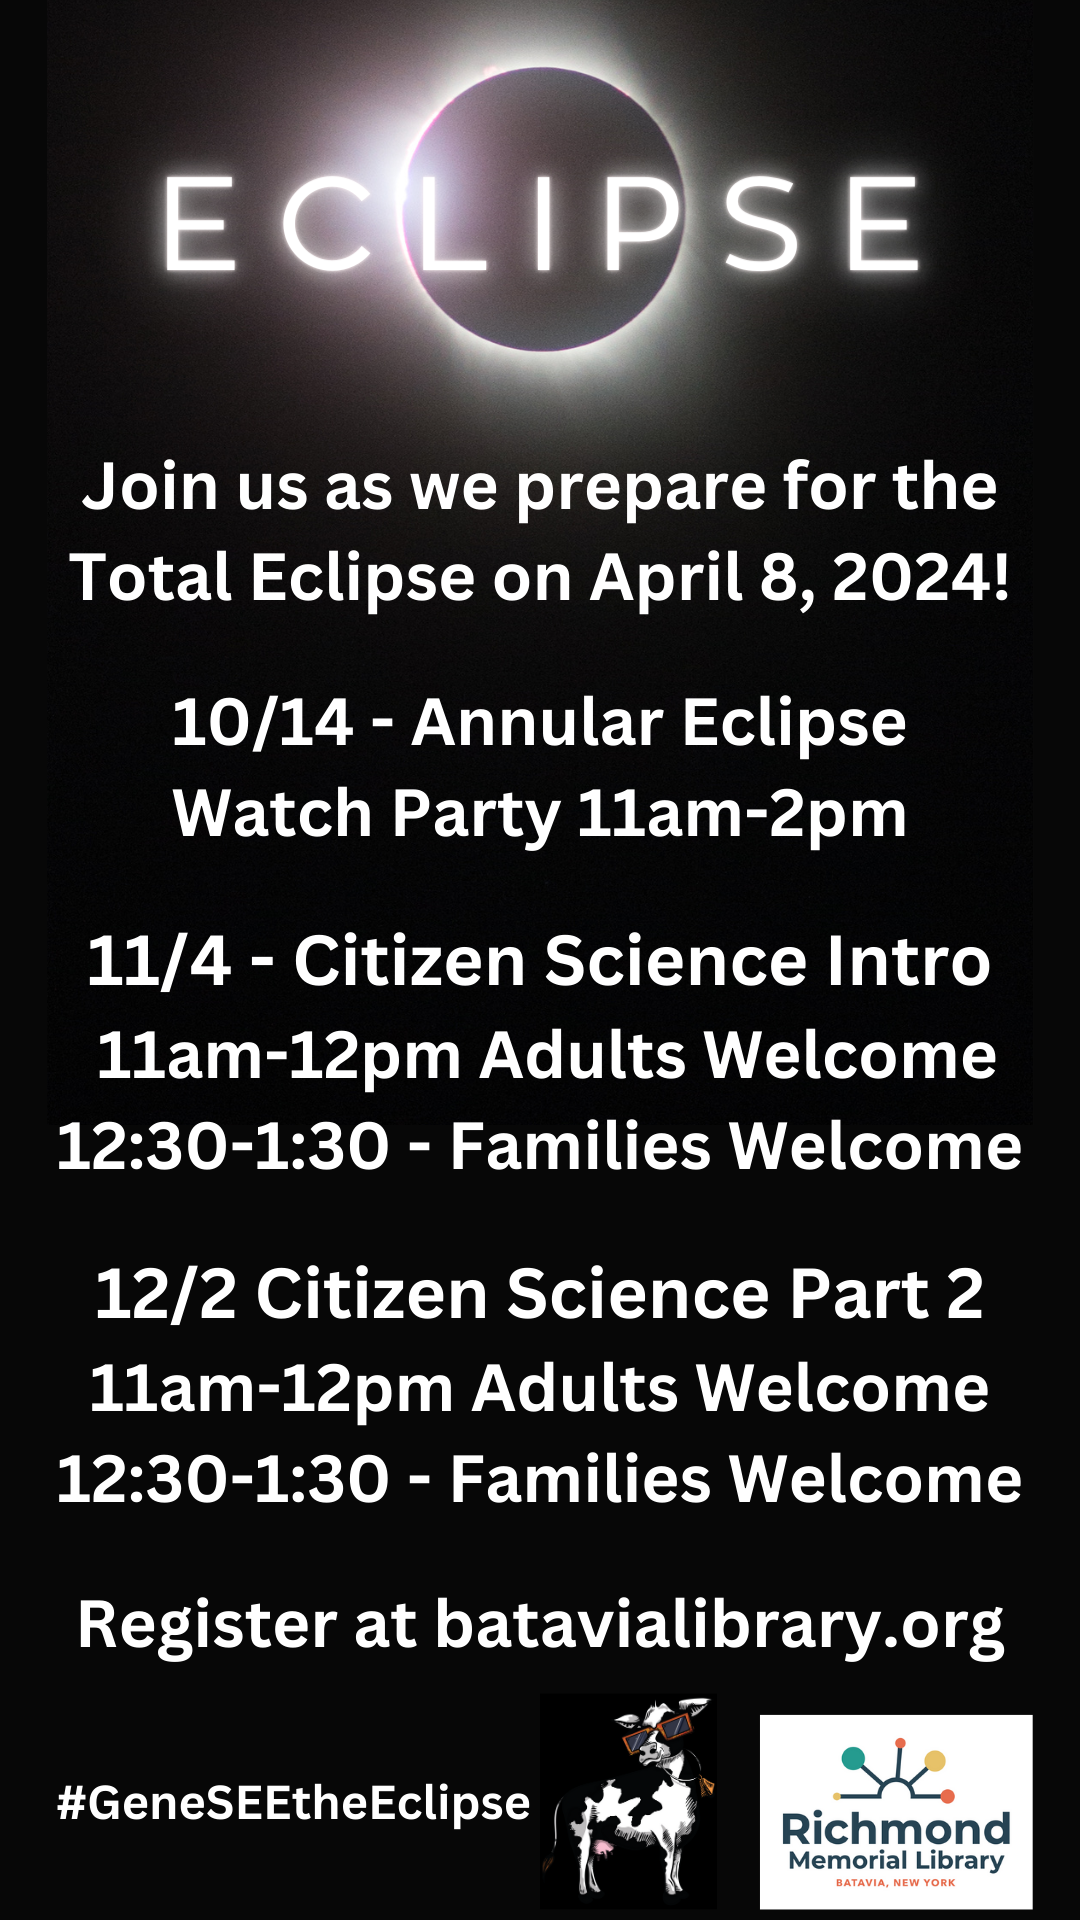  Annular Eclipse Watch Party 11am-2pm